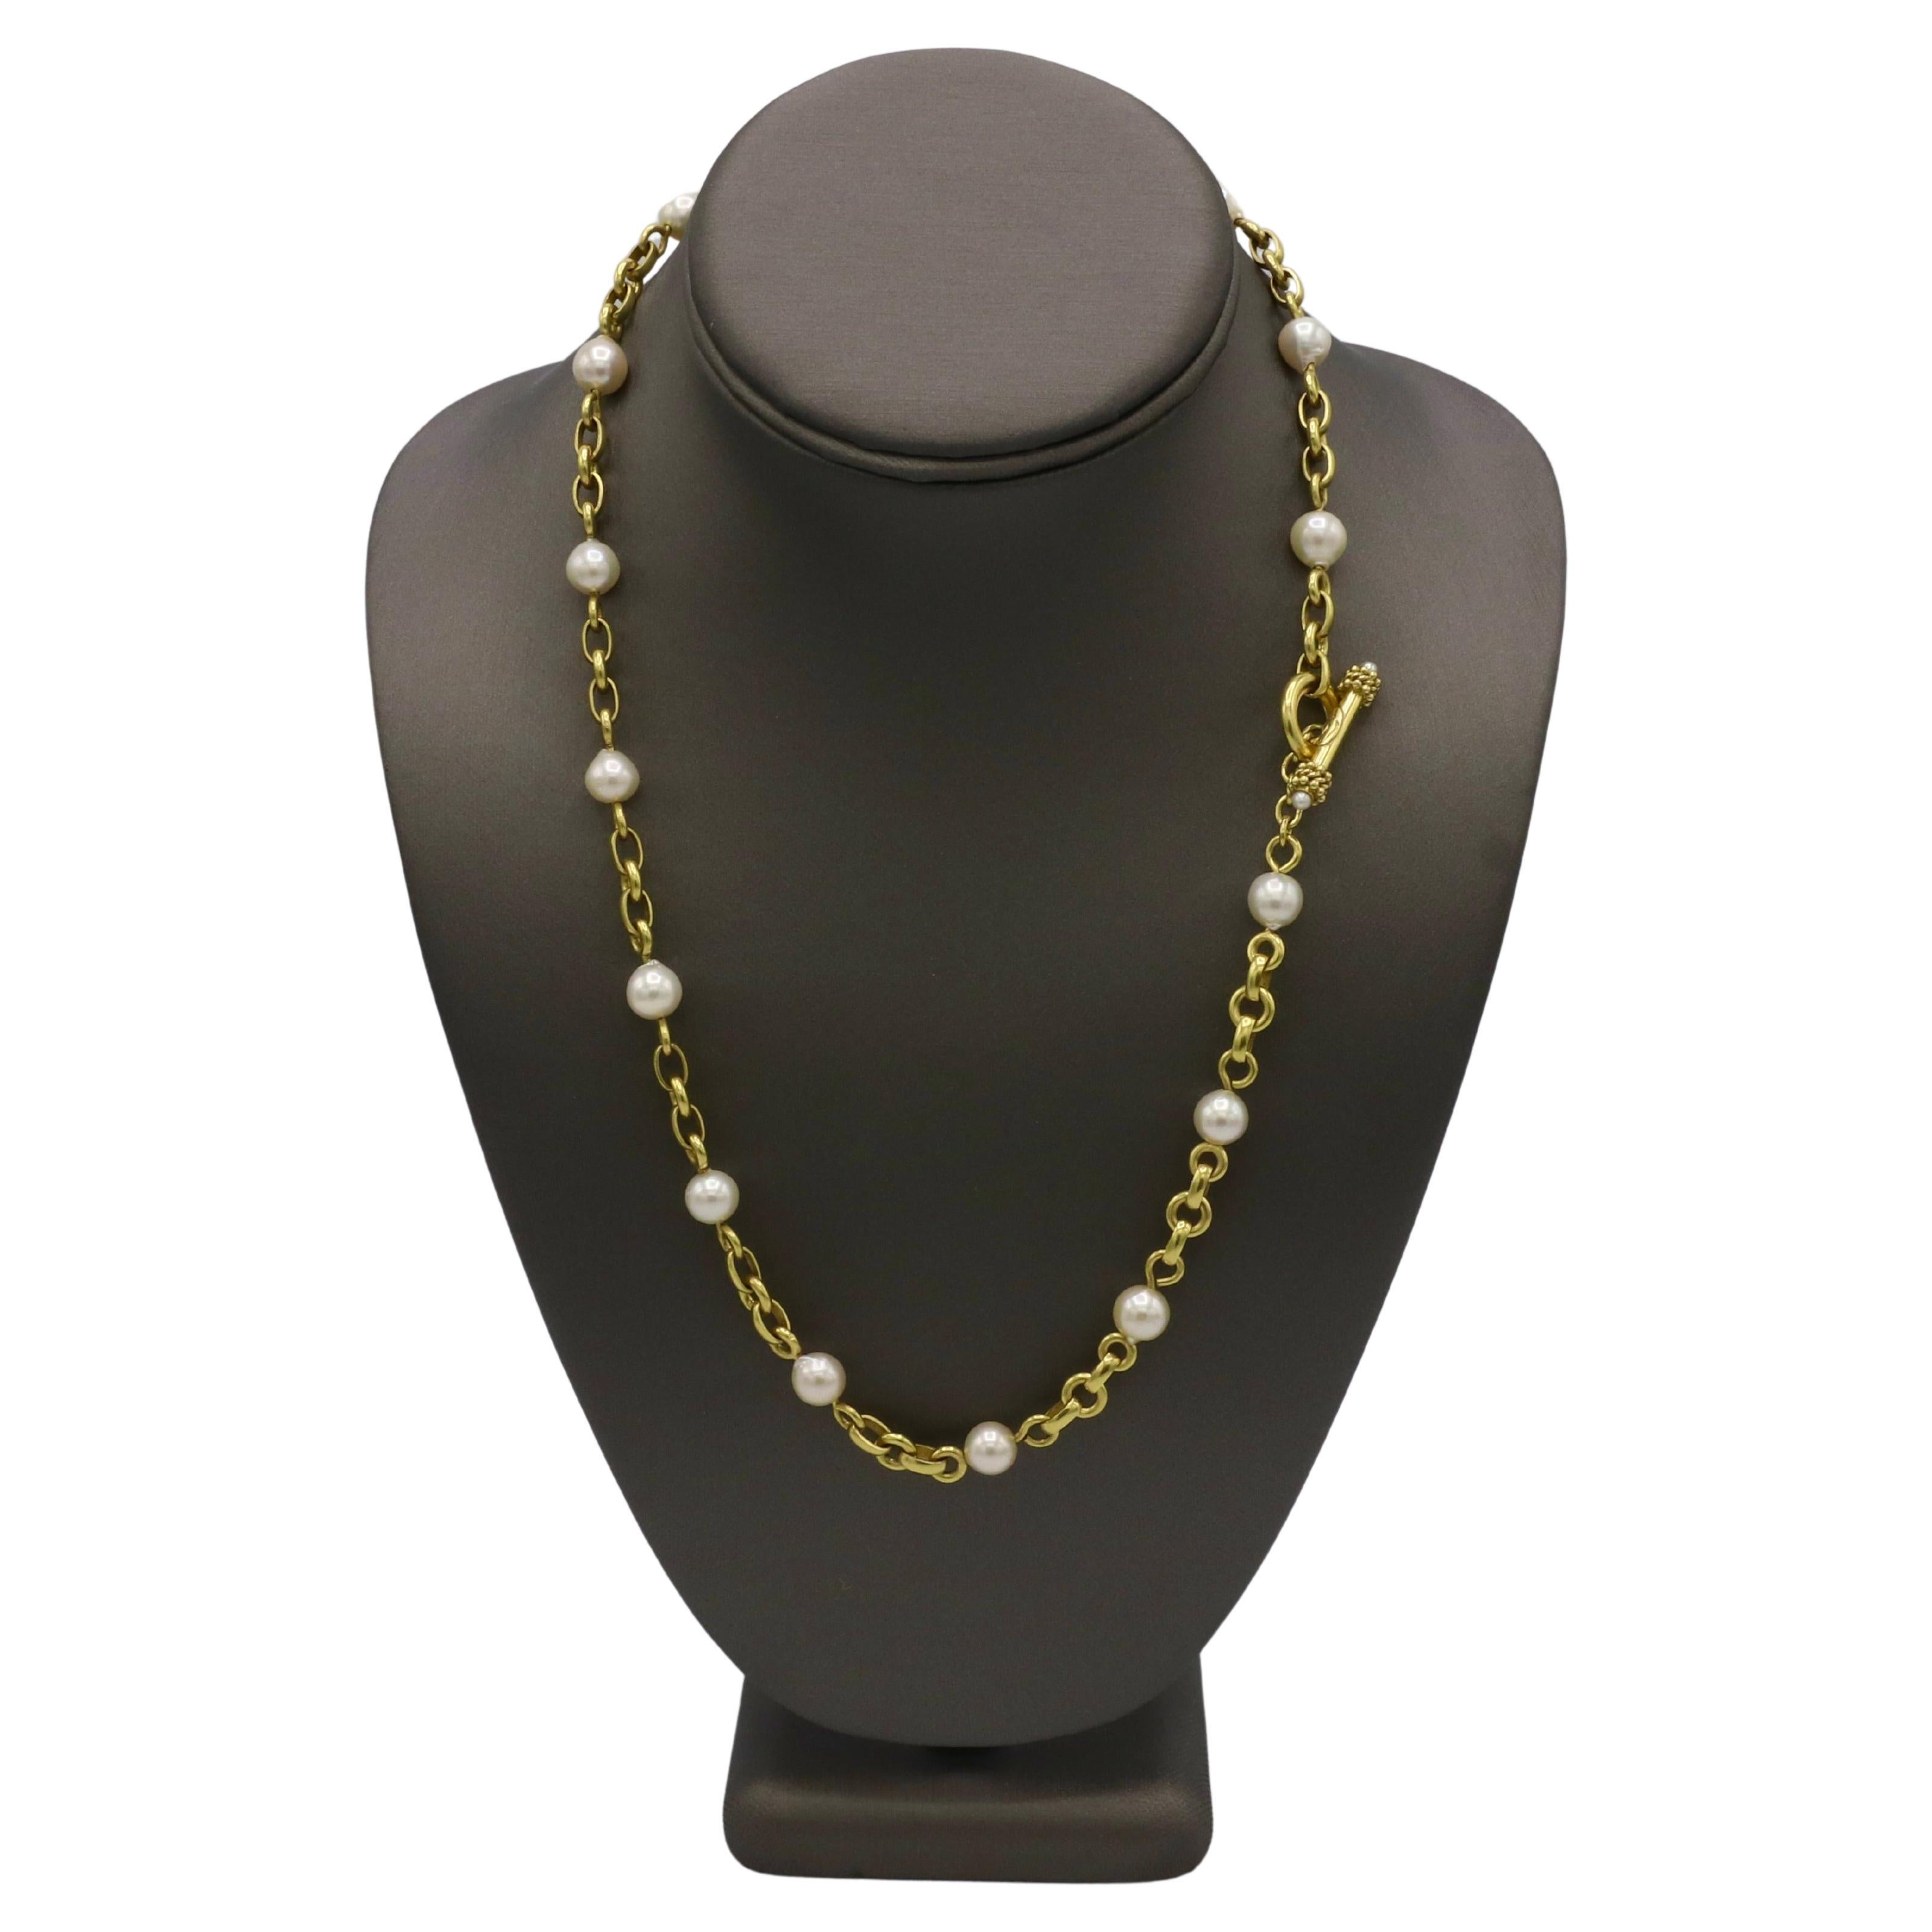 Elizabeth Locke 18 Karat Yellow Gold & Akoya Pearl Station Chain Link Necklace 
Metal: 18K yellow gold
Weight: 56.8 grams
Length: 21 inches
Clasp: Toggle
Pearls: 8mm Akoya Cultured Pearls

